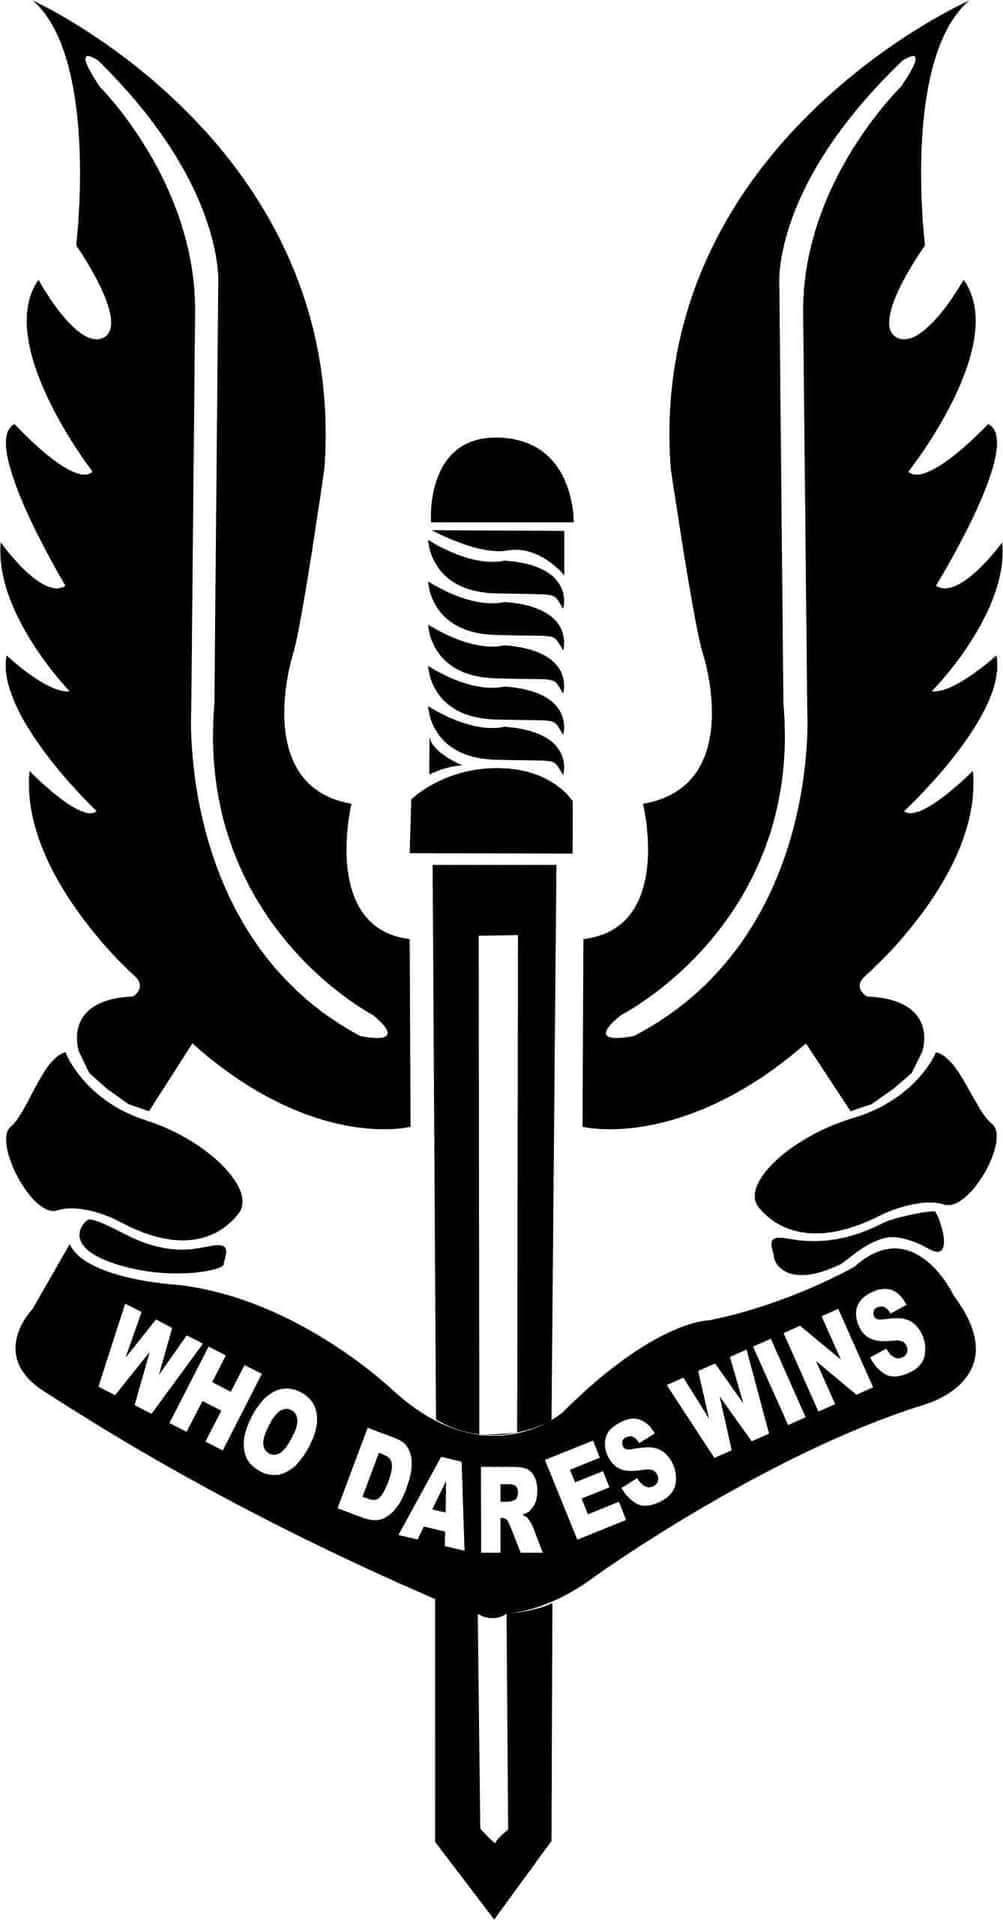 Who Dares Wins - A Black And White Logo